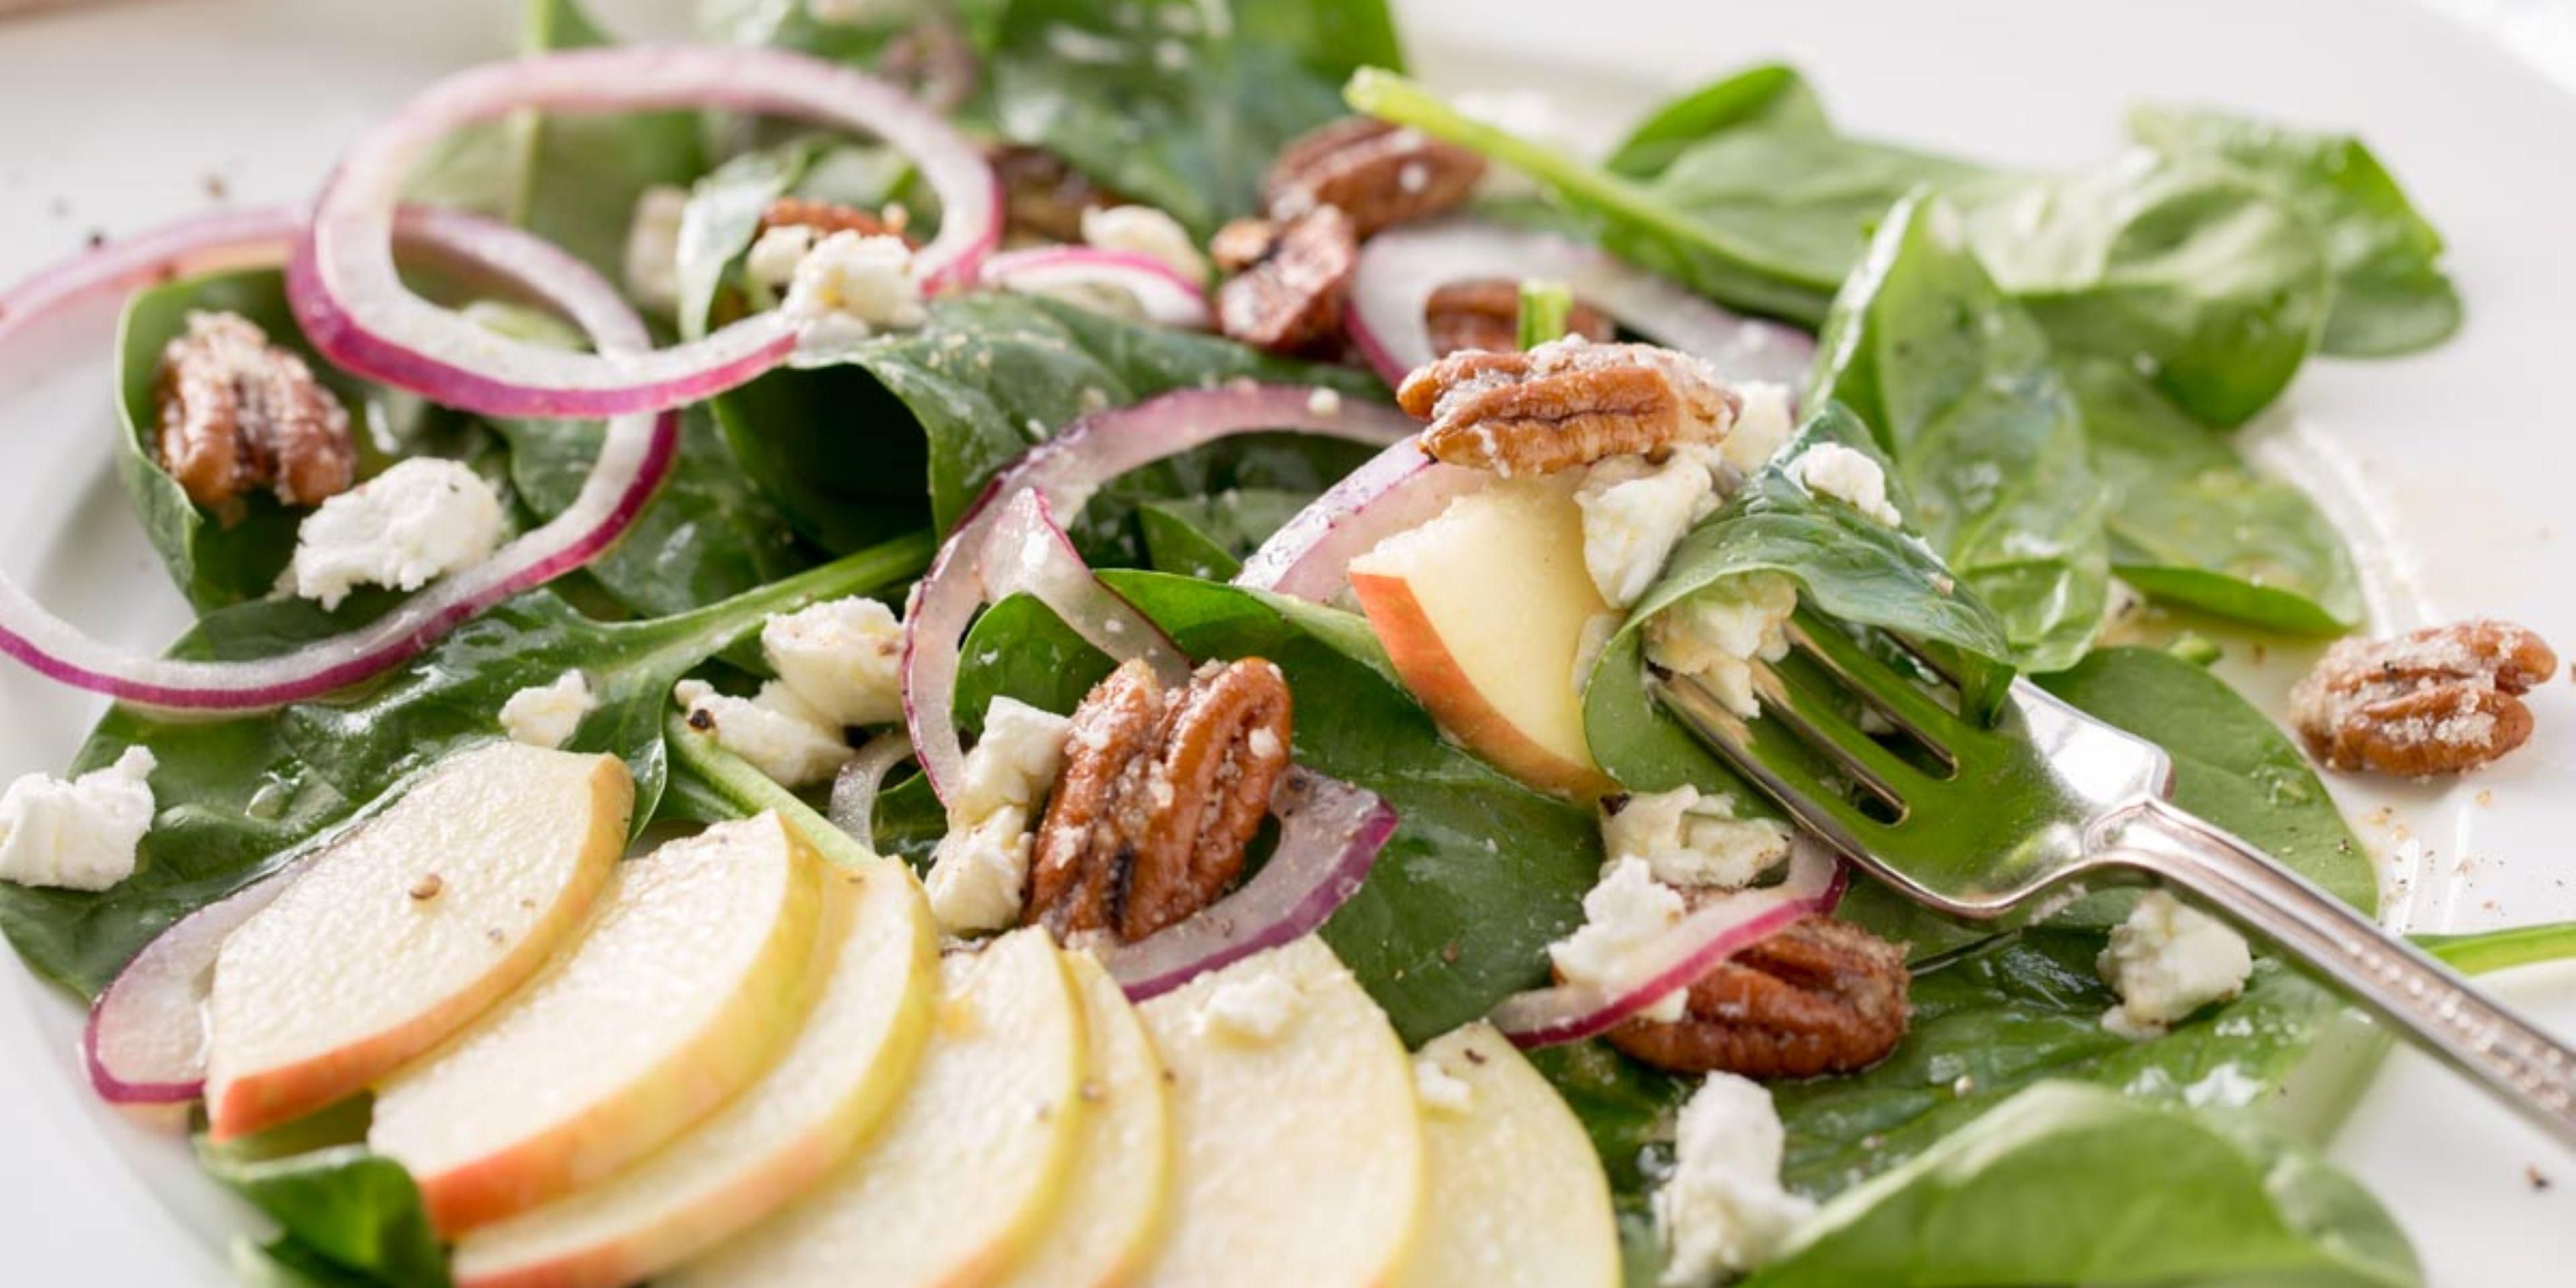 Beach Salad with fresh apples, candied pecans and feta